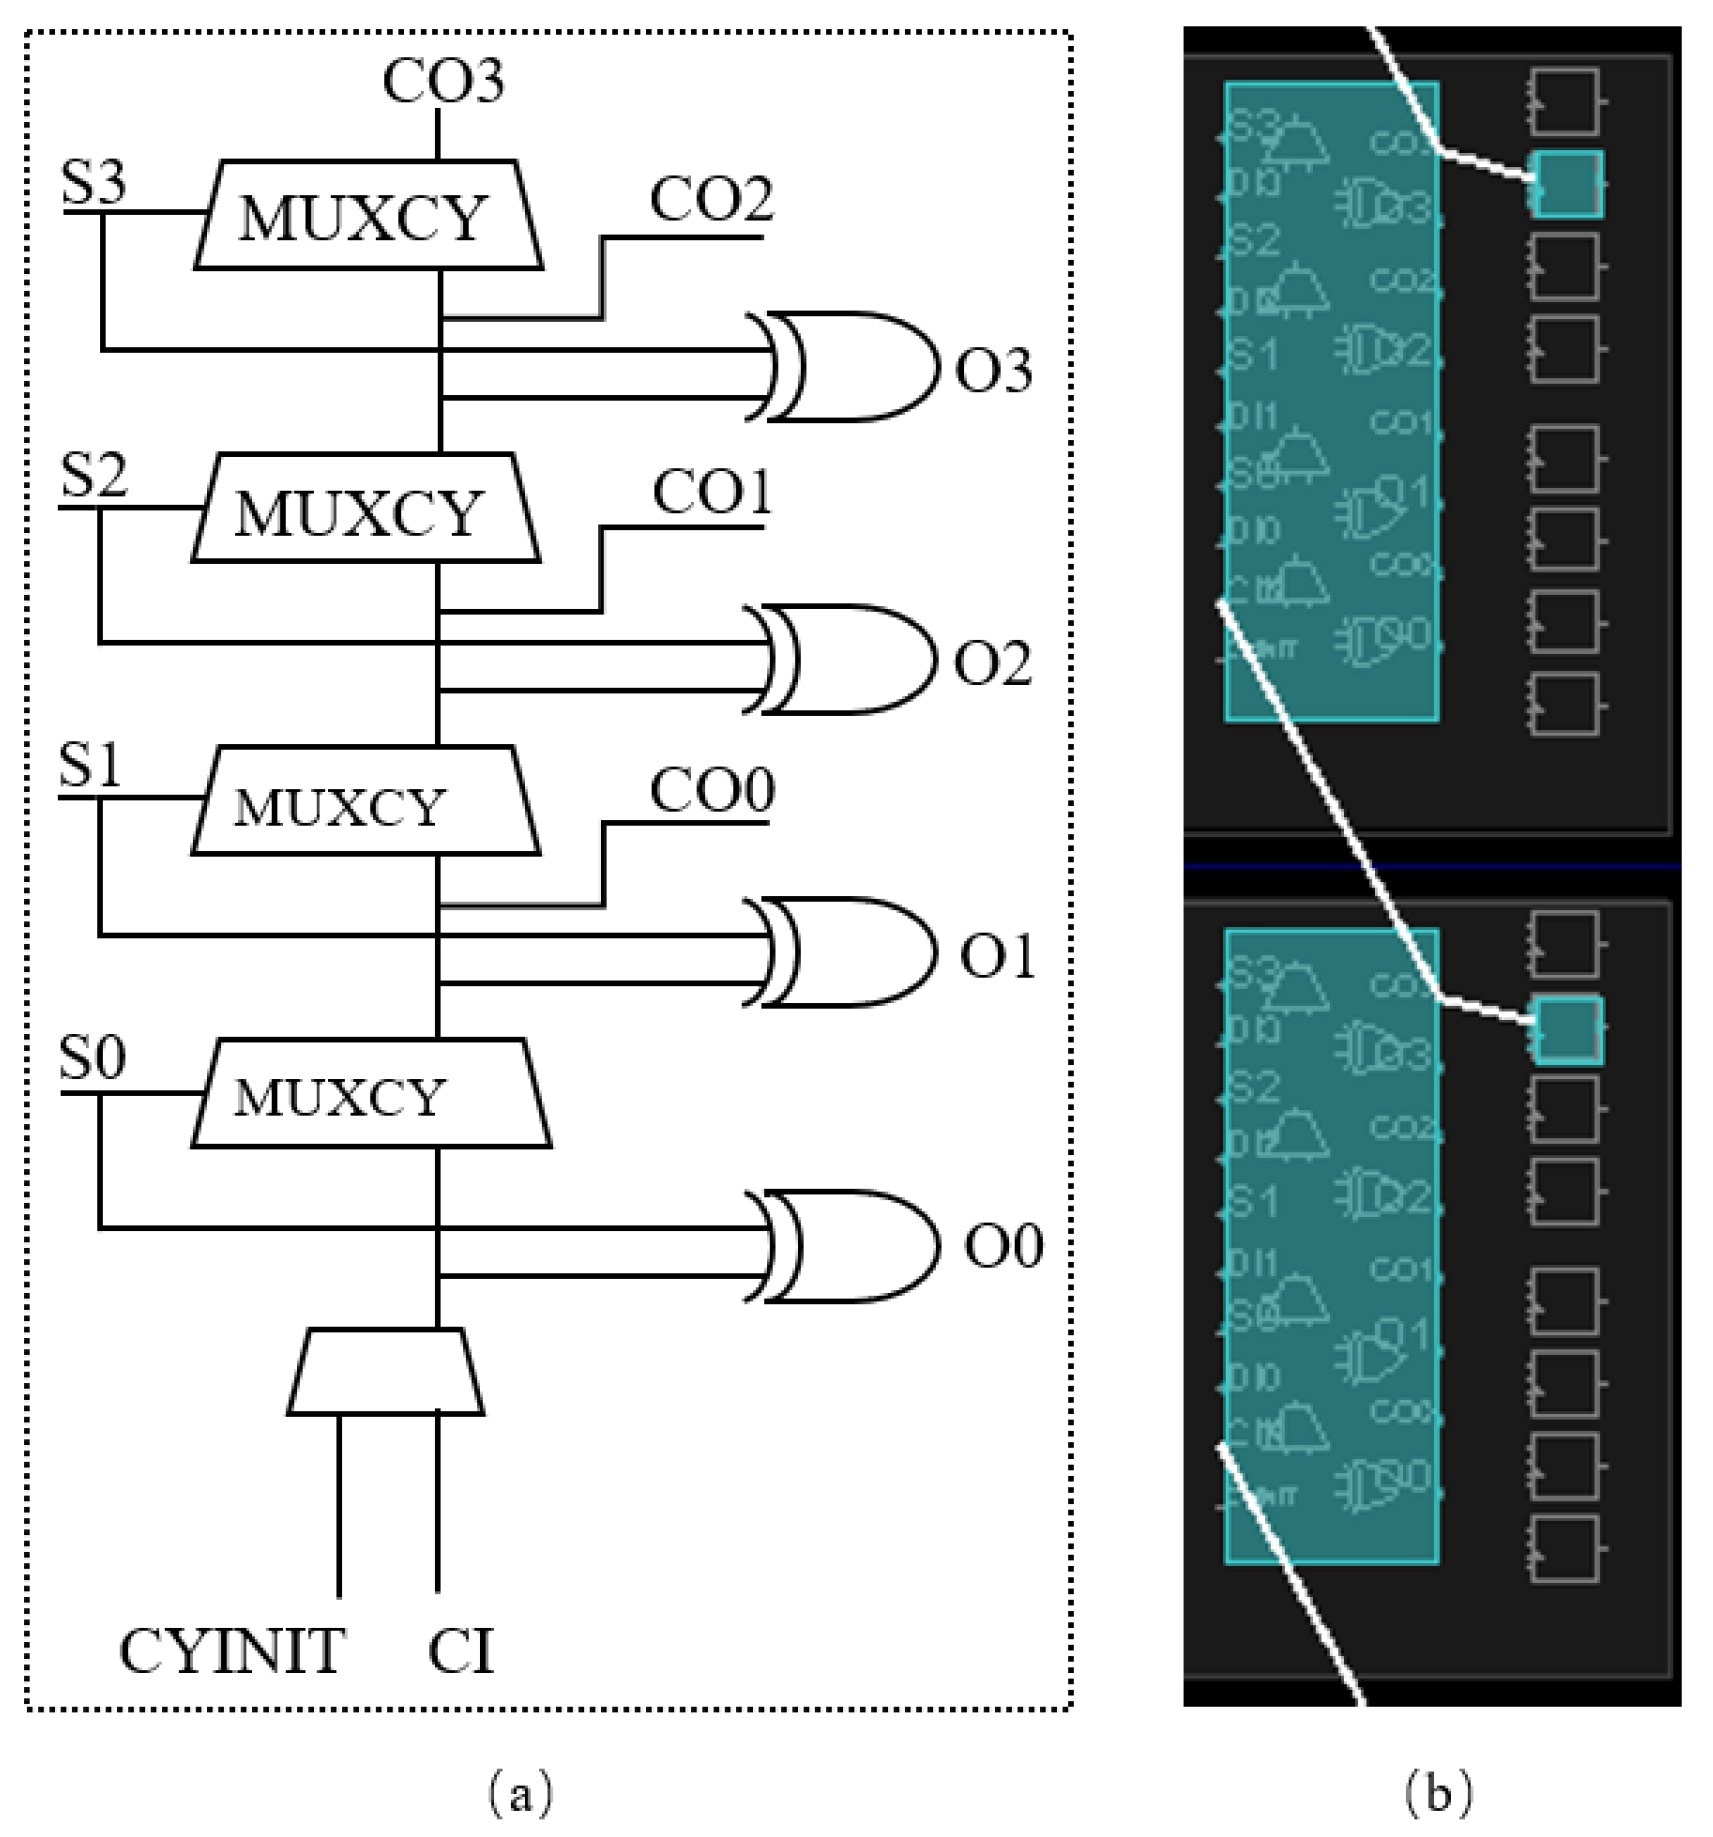 (a) CARRY4 elements in Xilinx FPGA; (b) delay line structure.